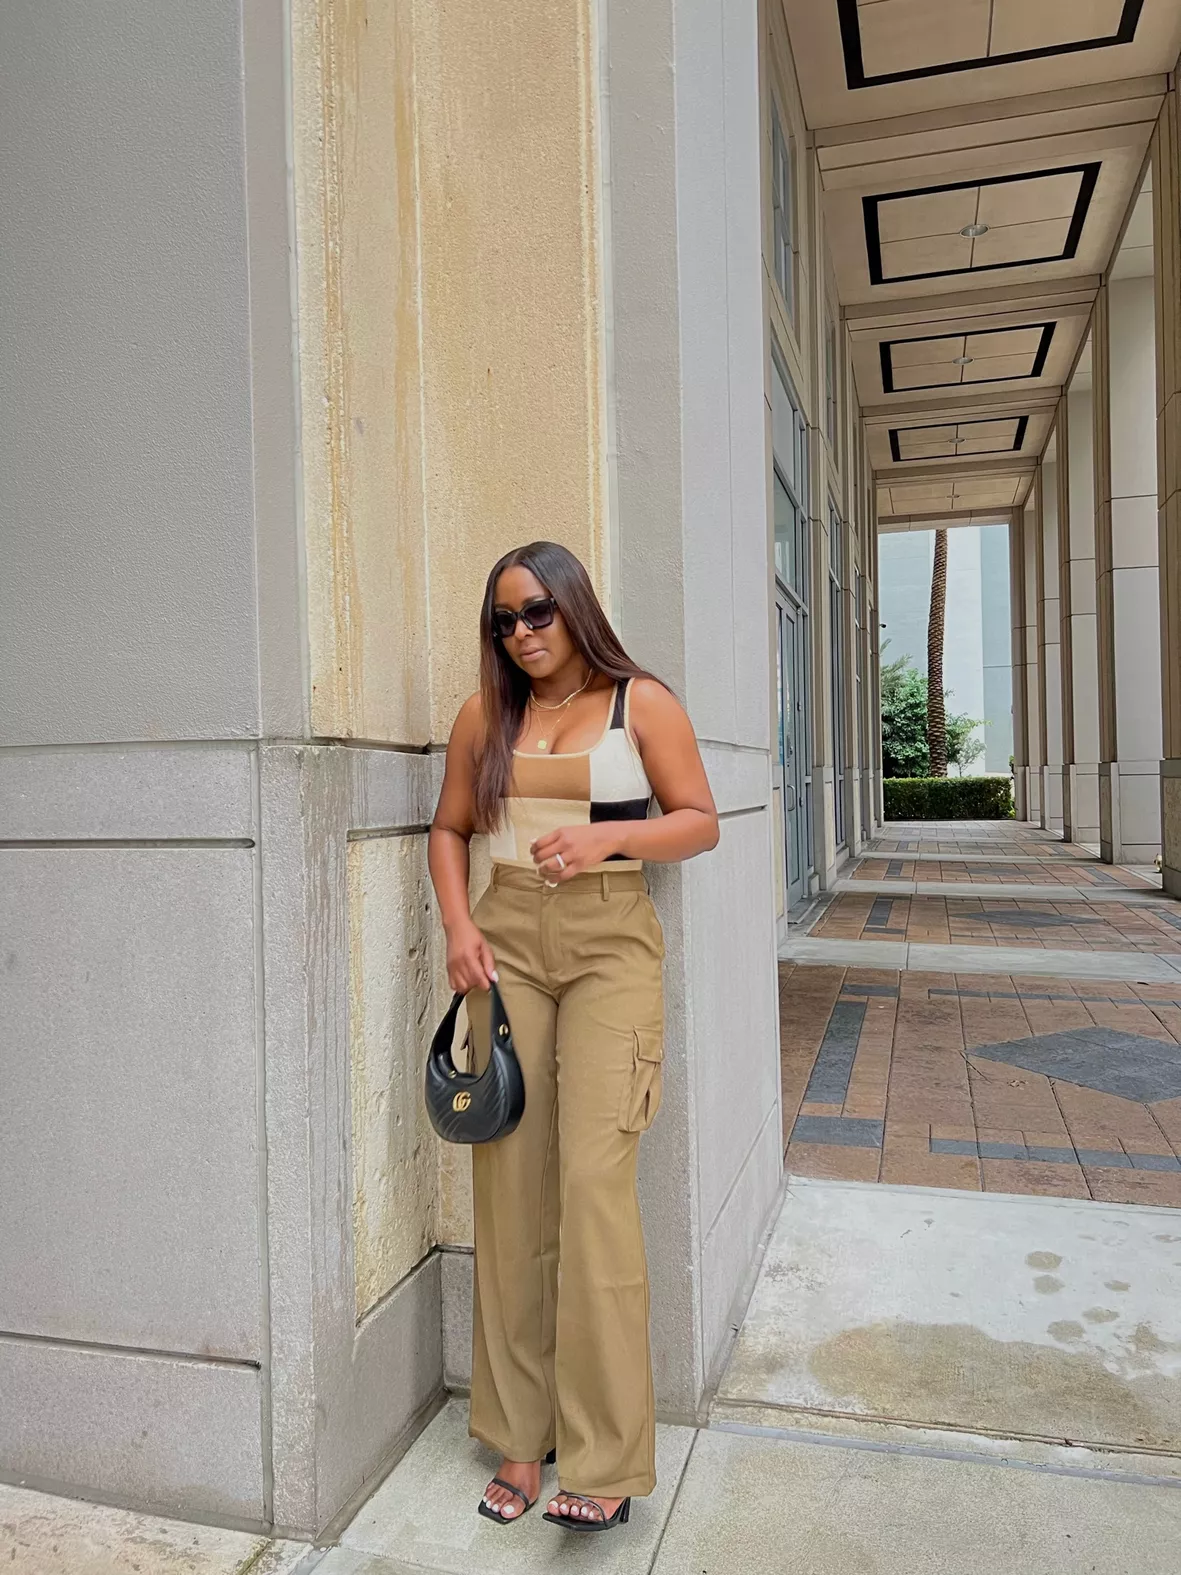 Olive green pants  Olive pants outfit, Casual fall outfits, Outfits with  leggings